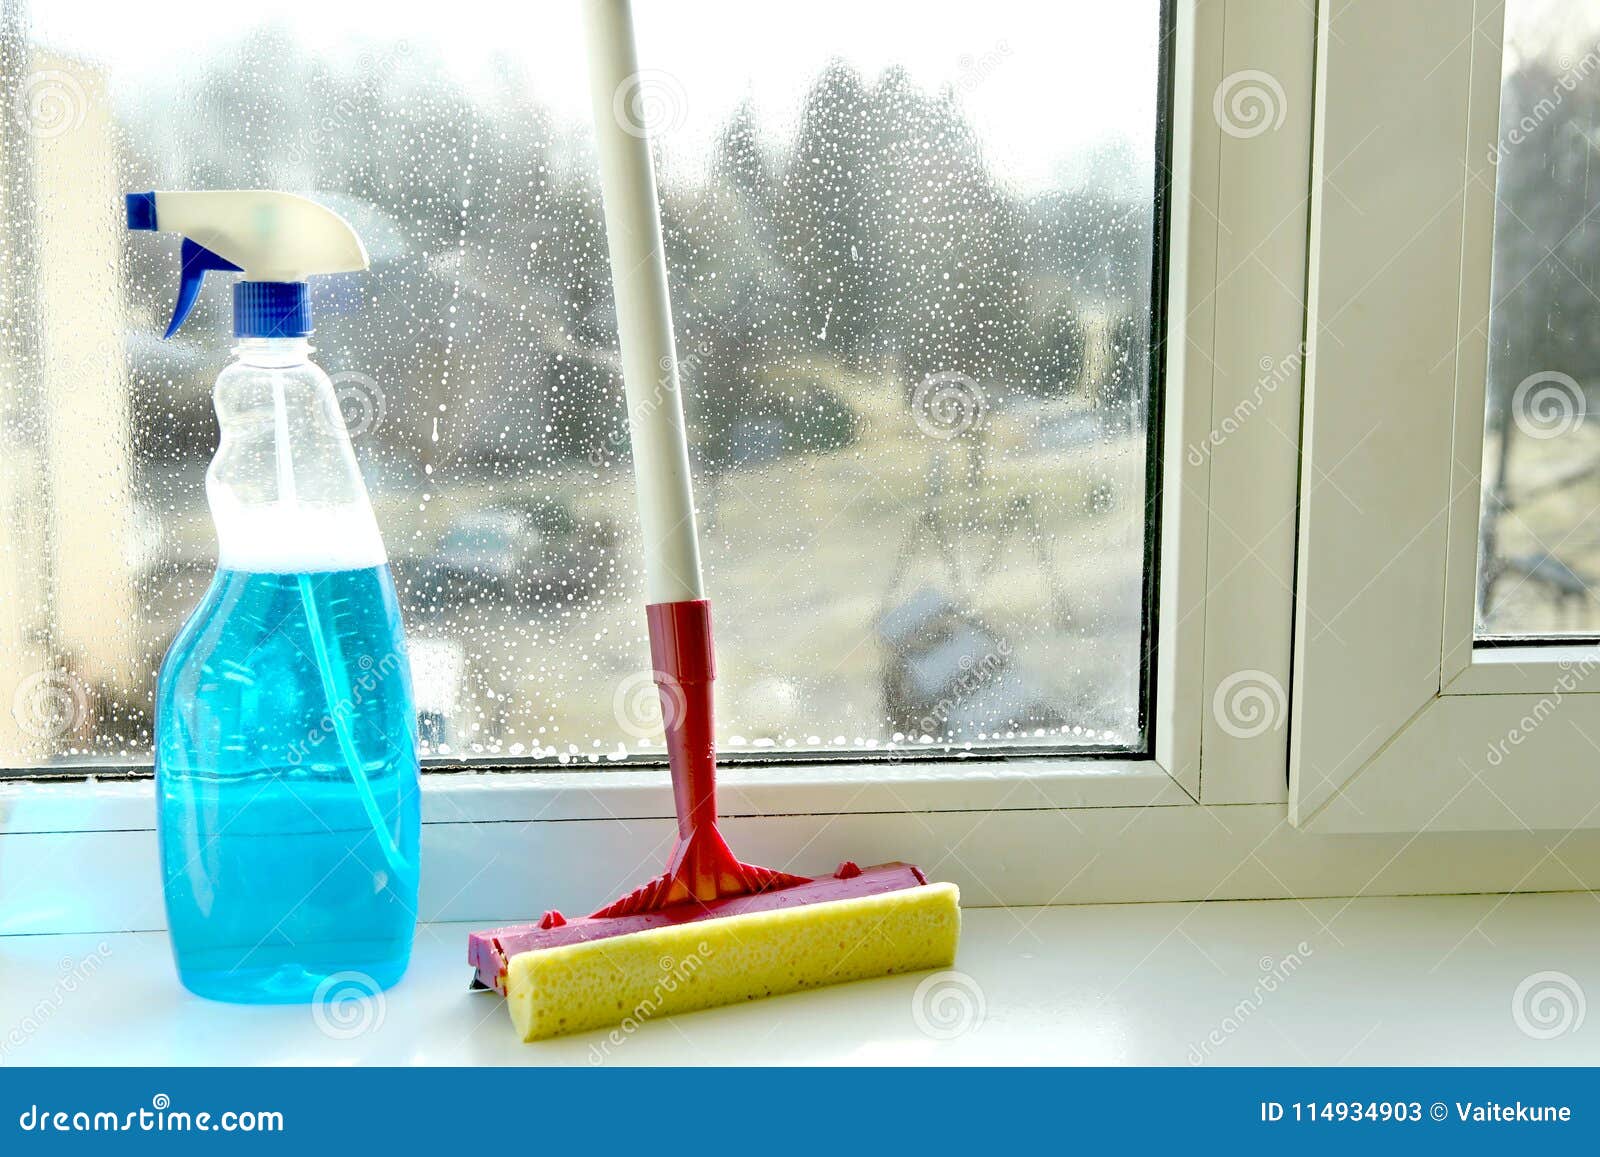 Glass Squeegee And Bottle Of Window Cleaner Stock Image